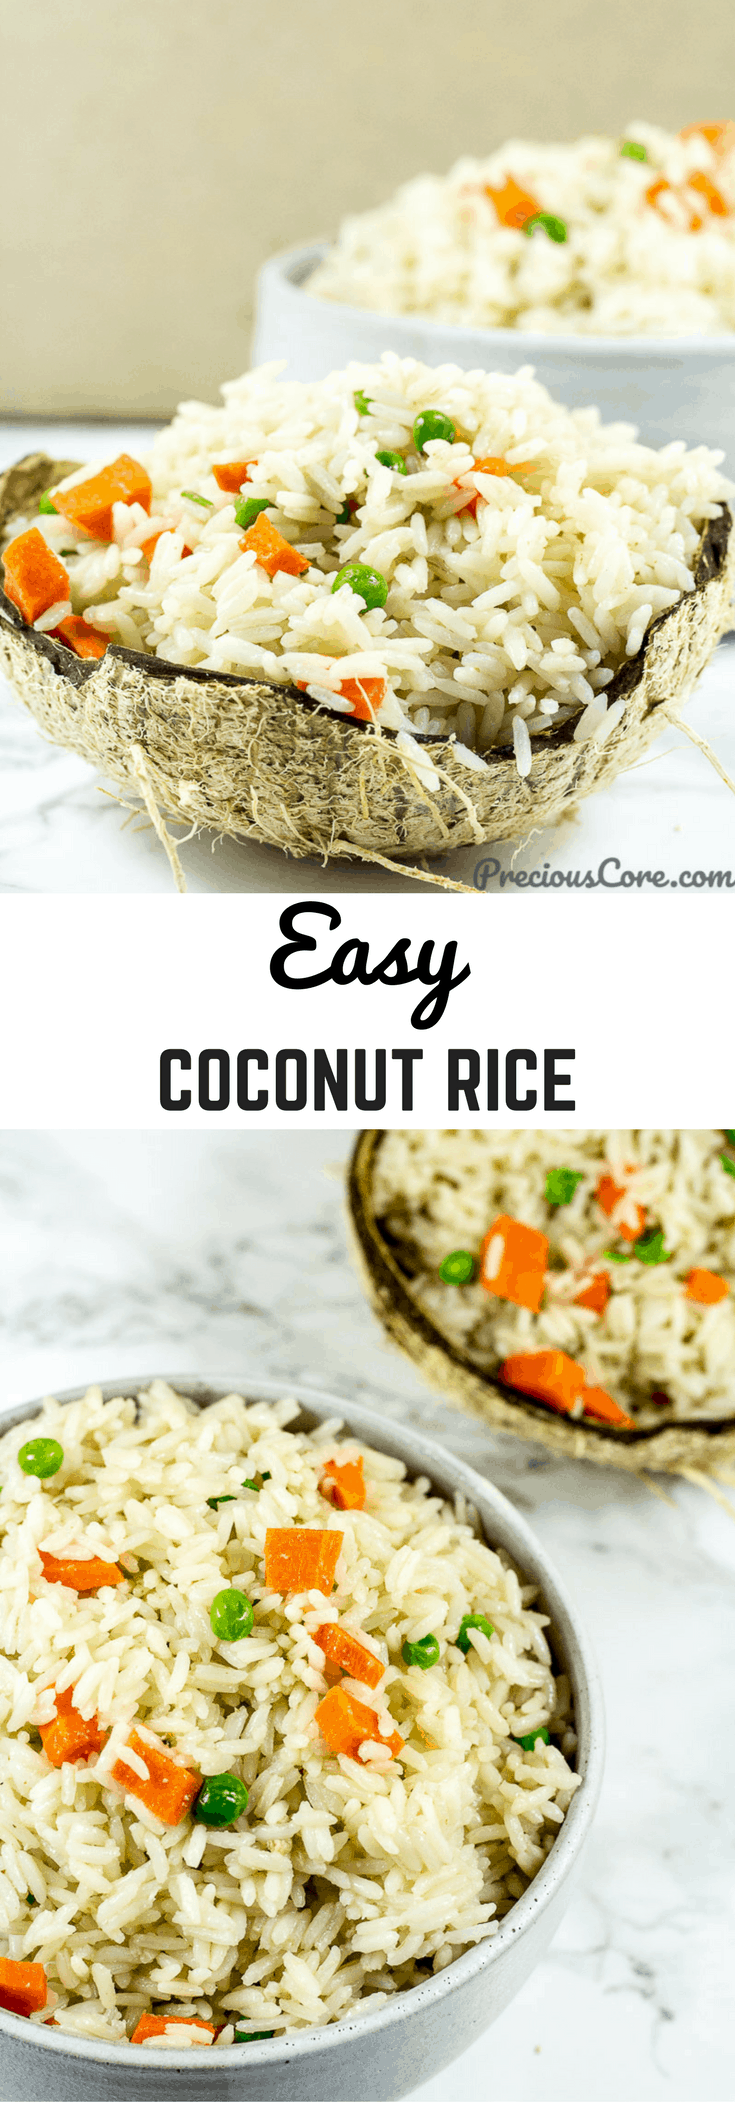 This easy coconut rice only requires 5 ingredients and about 20 minutes. The perfect side dish for stews or curries! Enjoy this simple coconut rice recipe on PreciousCore.com.